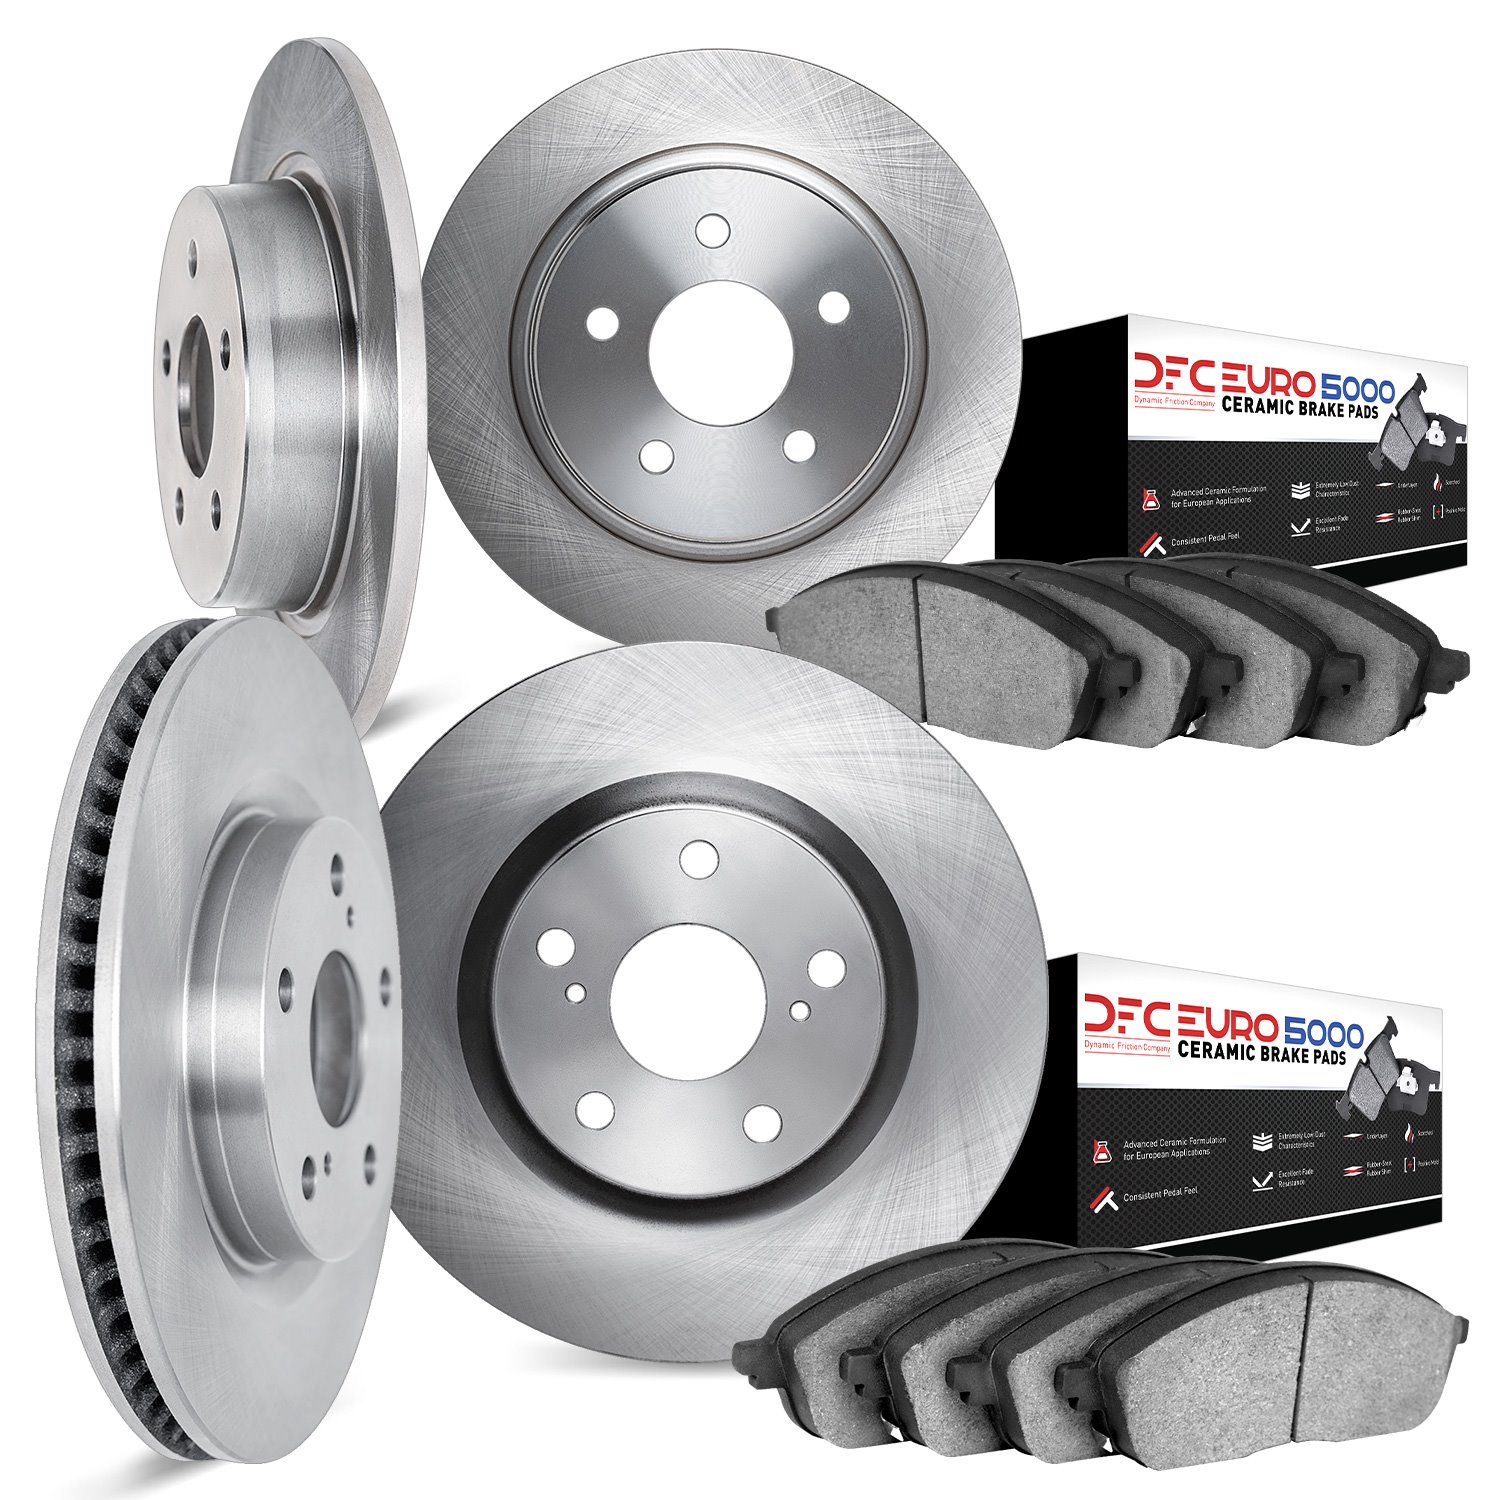 6604-12560 Brake Rotors w/5000 Euro Ceramic Brake Pads, Fits Select Audi/Volkswagen, Position: Front and Rear